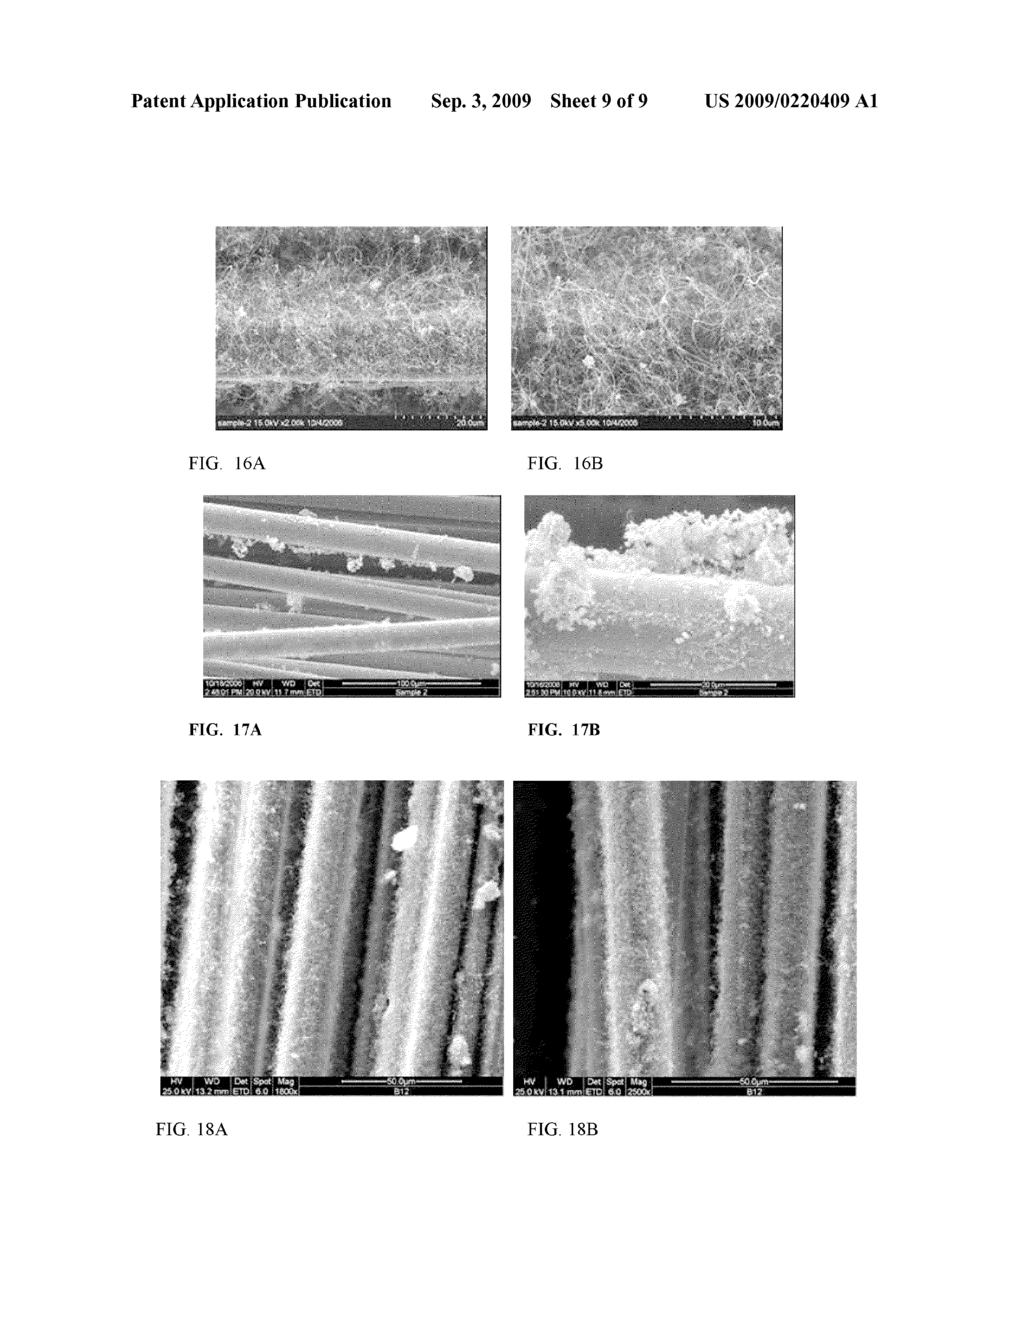 CONTINUOUS PROCESS FOR THE PRODUCTION OF CARBON NANOFIBER REINFORCED CONTINUOUS FIBER PREFORMS AND COMPOSITES MADE THEREFROM - diagram, schematic, and image 10